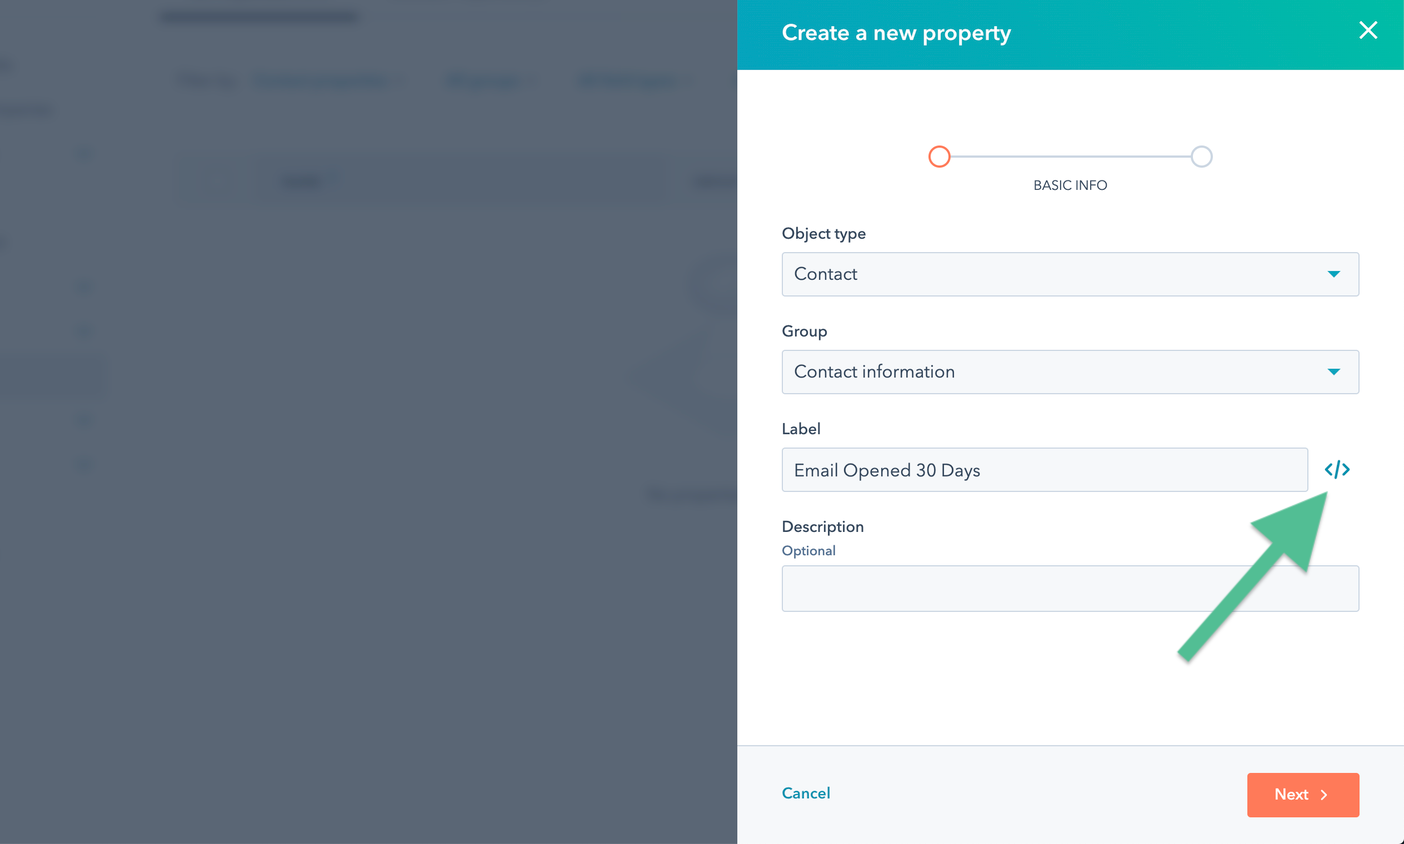 A screenshot of the Create a new property setup flow in Hubspot.